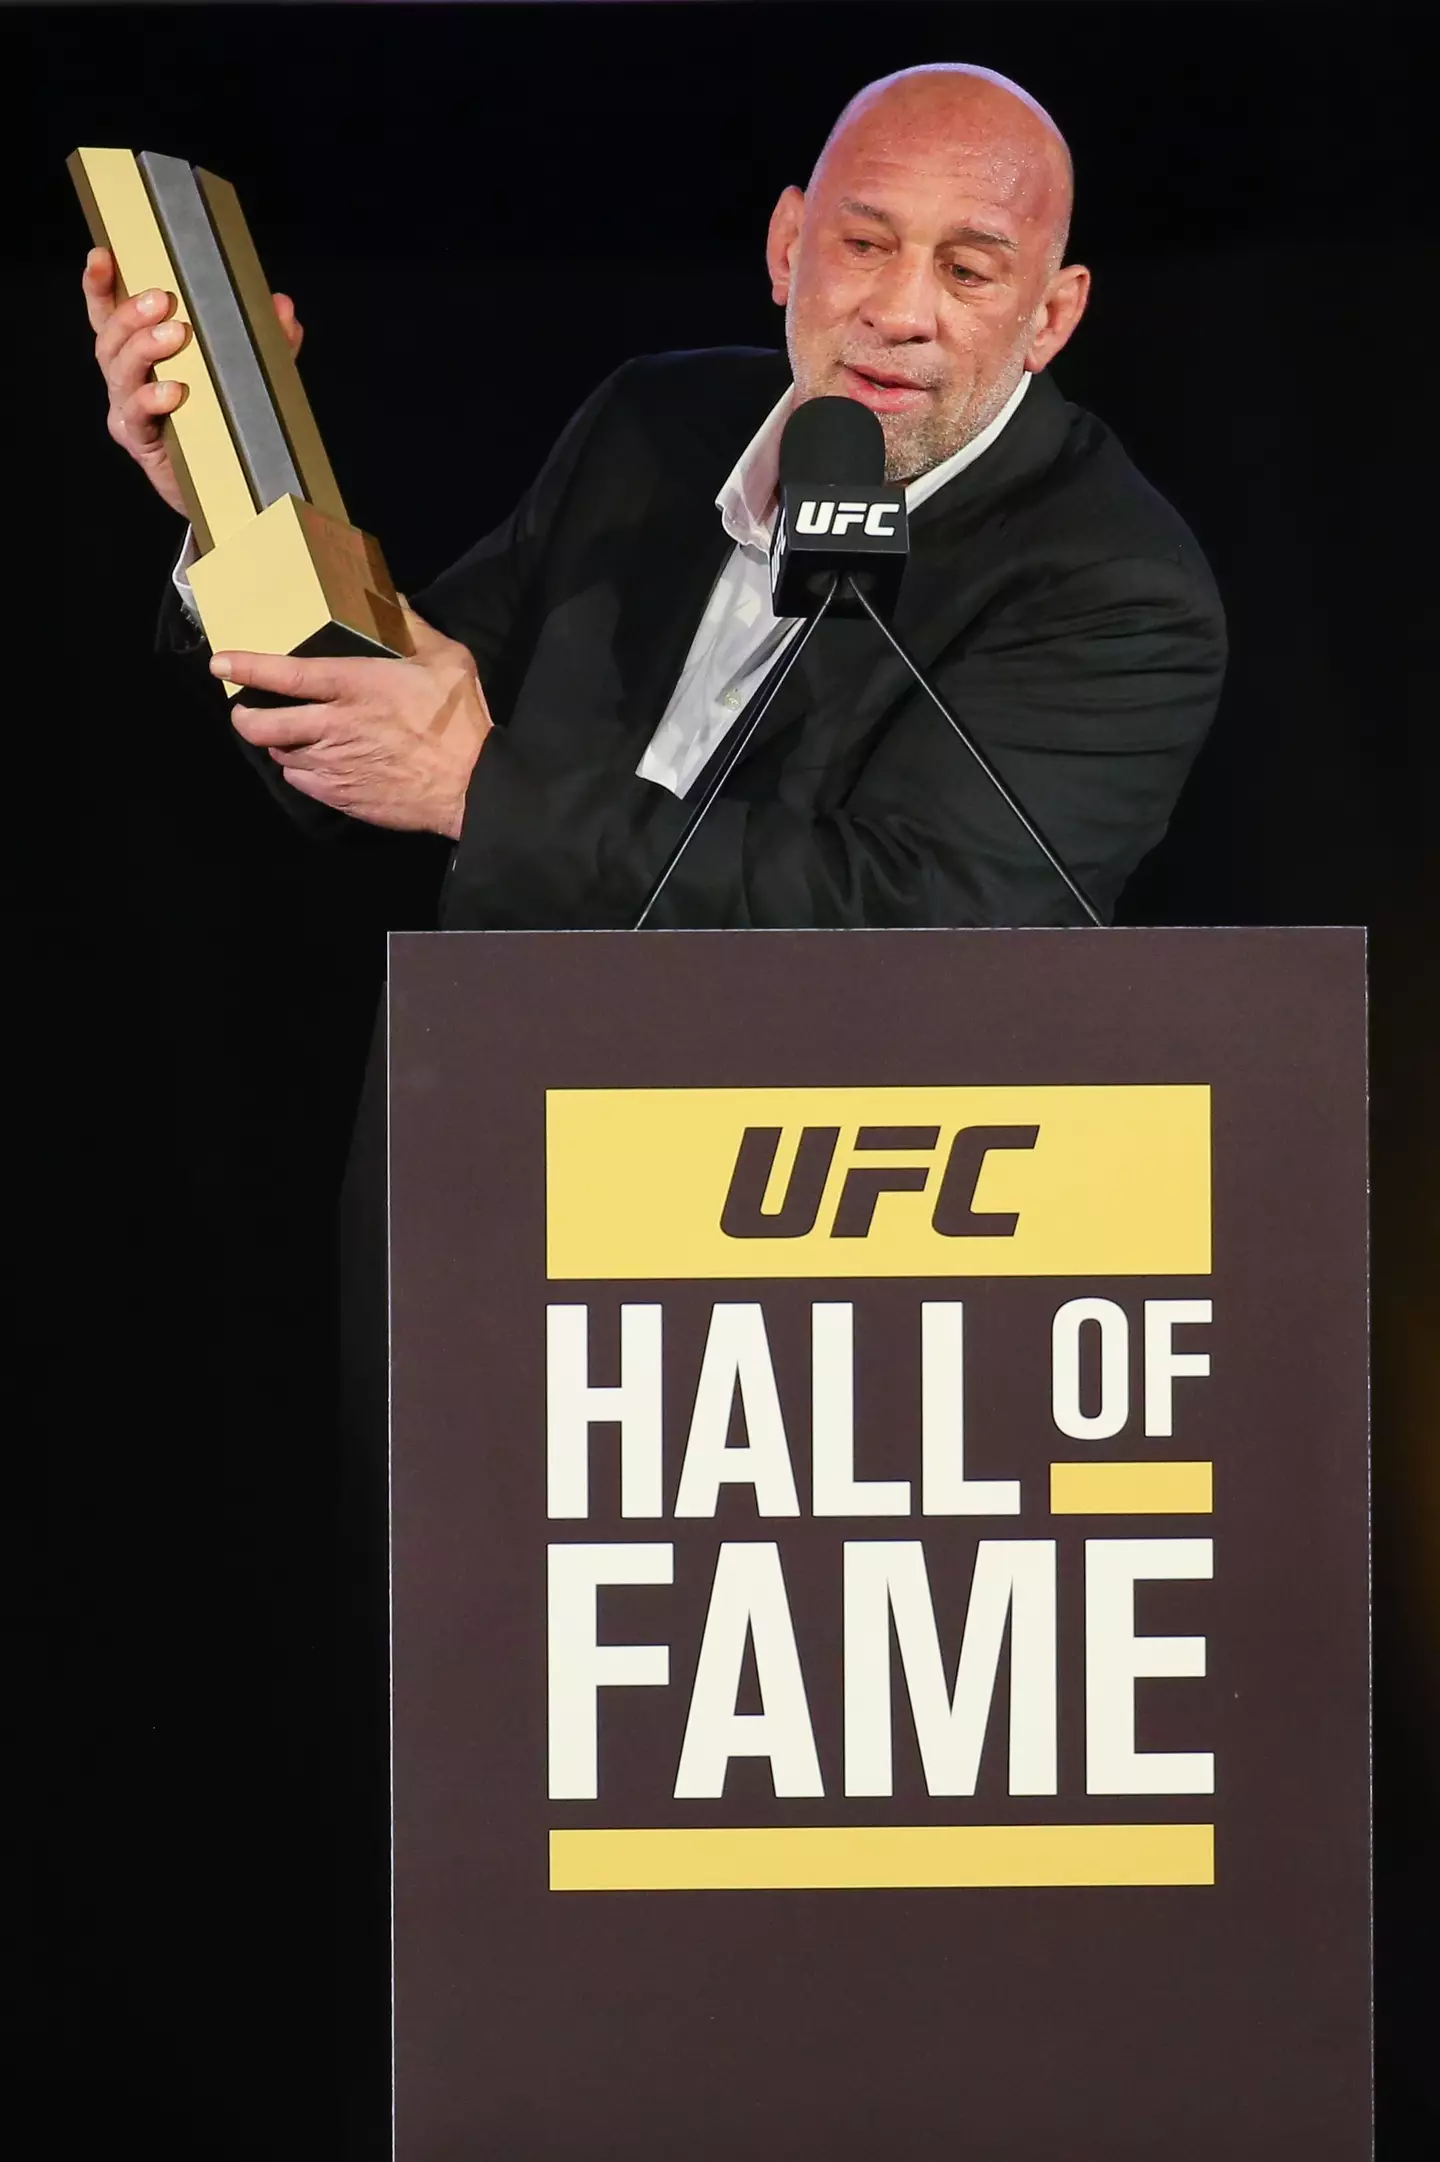 Mark Coleman was inducted into the UFC Hall of Fame in 2016.